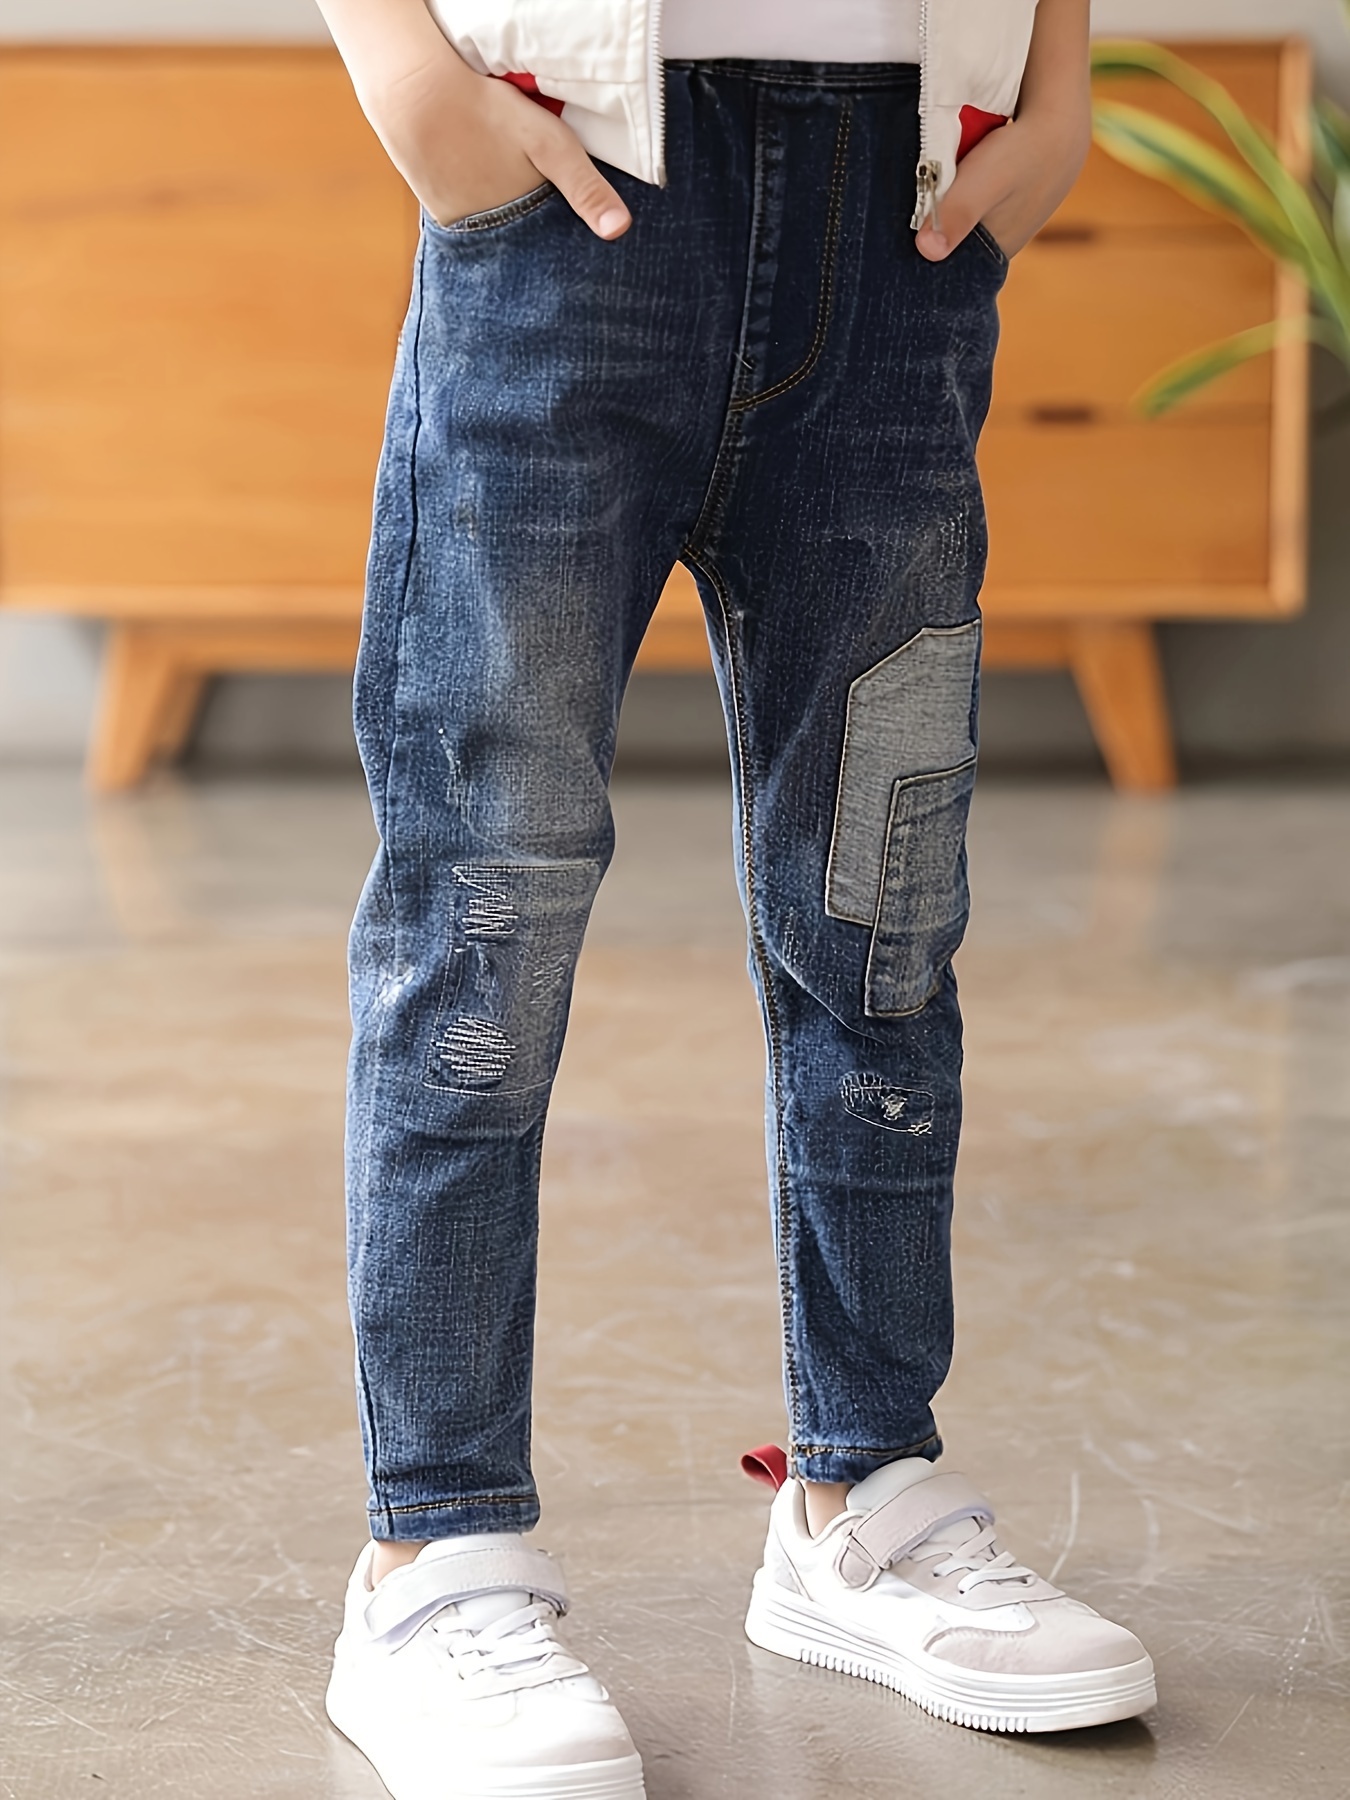 Kid's Trendy Straight Jeans For Cool Boys, Denim Pants With Pockets, Boy's  Clothes For All Seasons